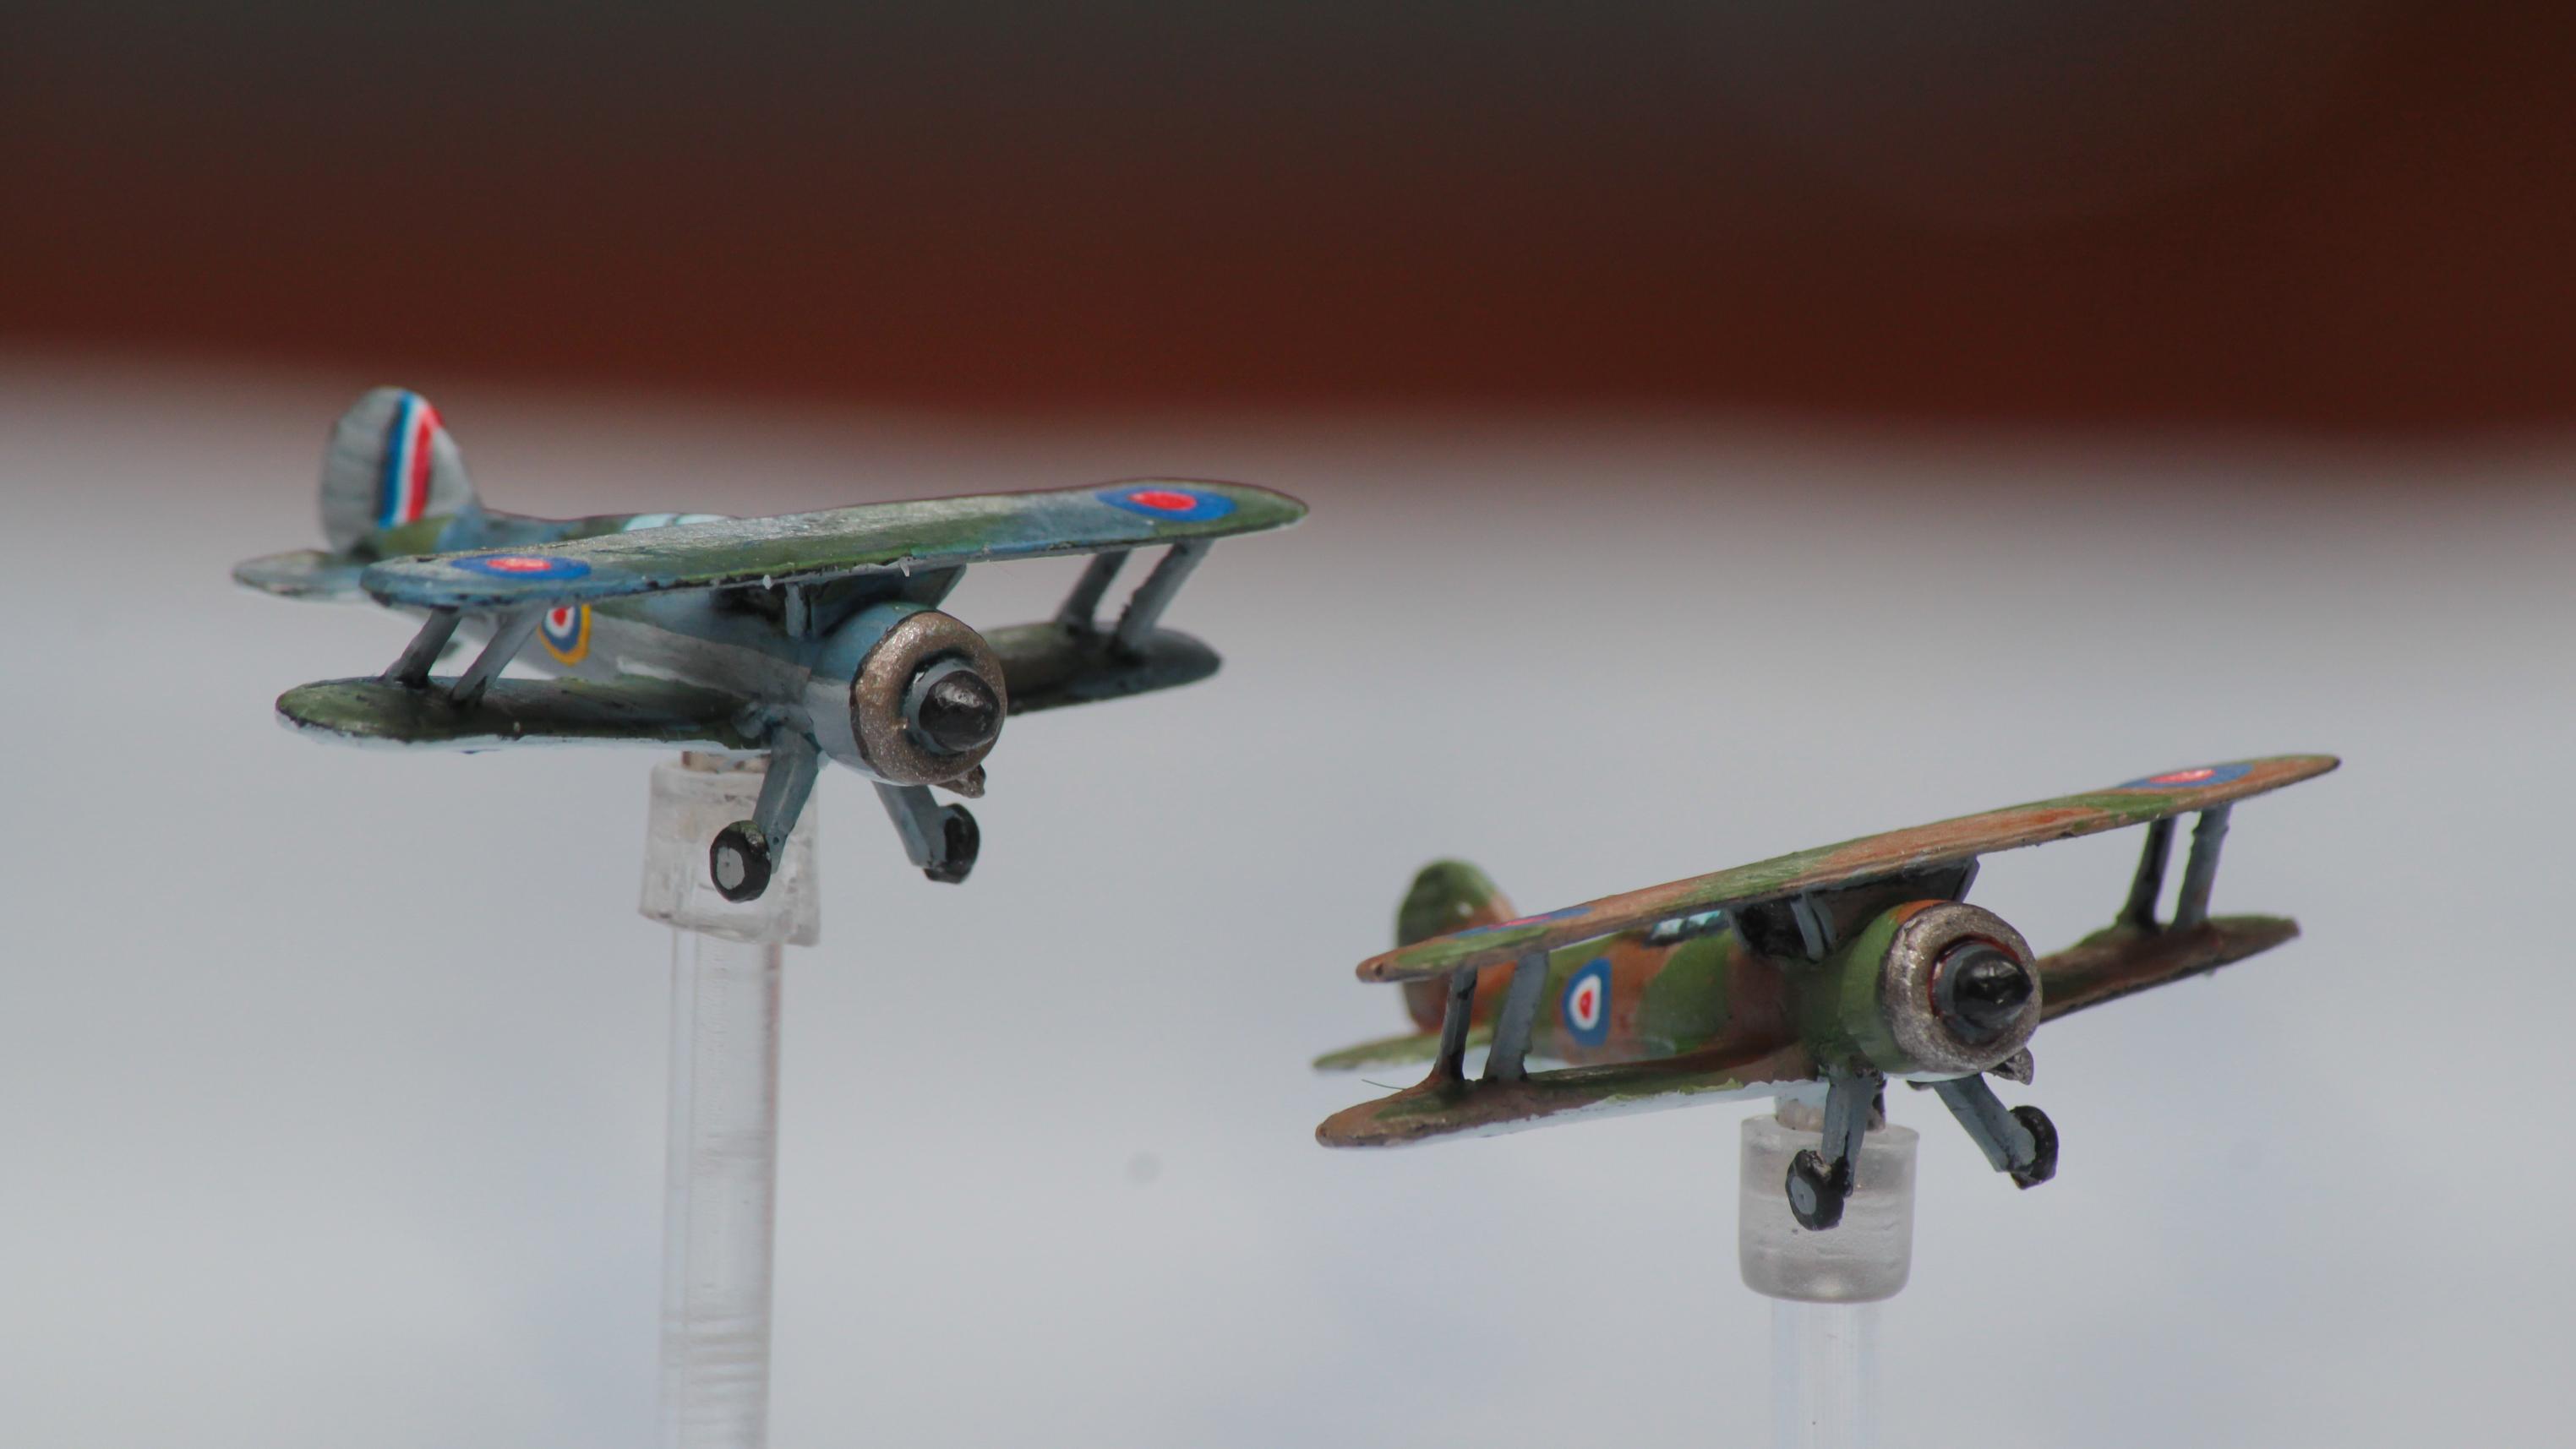 1:300 Scale, 6mm Scale, Air, Air Combat, Aircraft, Aviation, Biplane, Fliers, Germans, Historical, Planes, Raf, World War 2